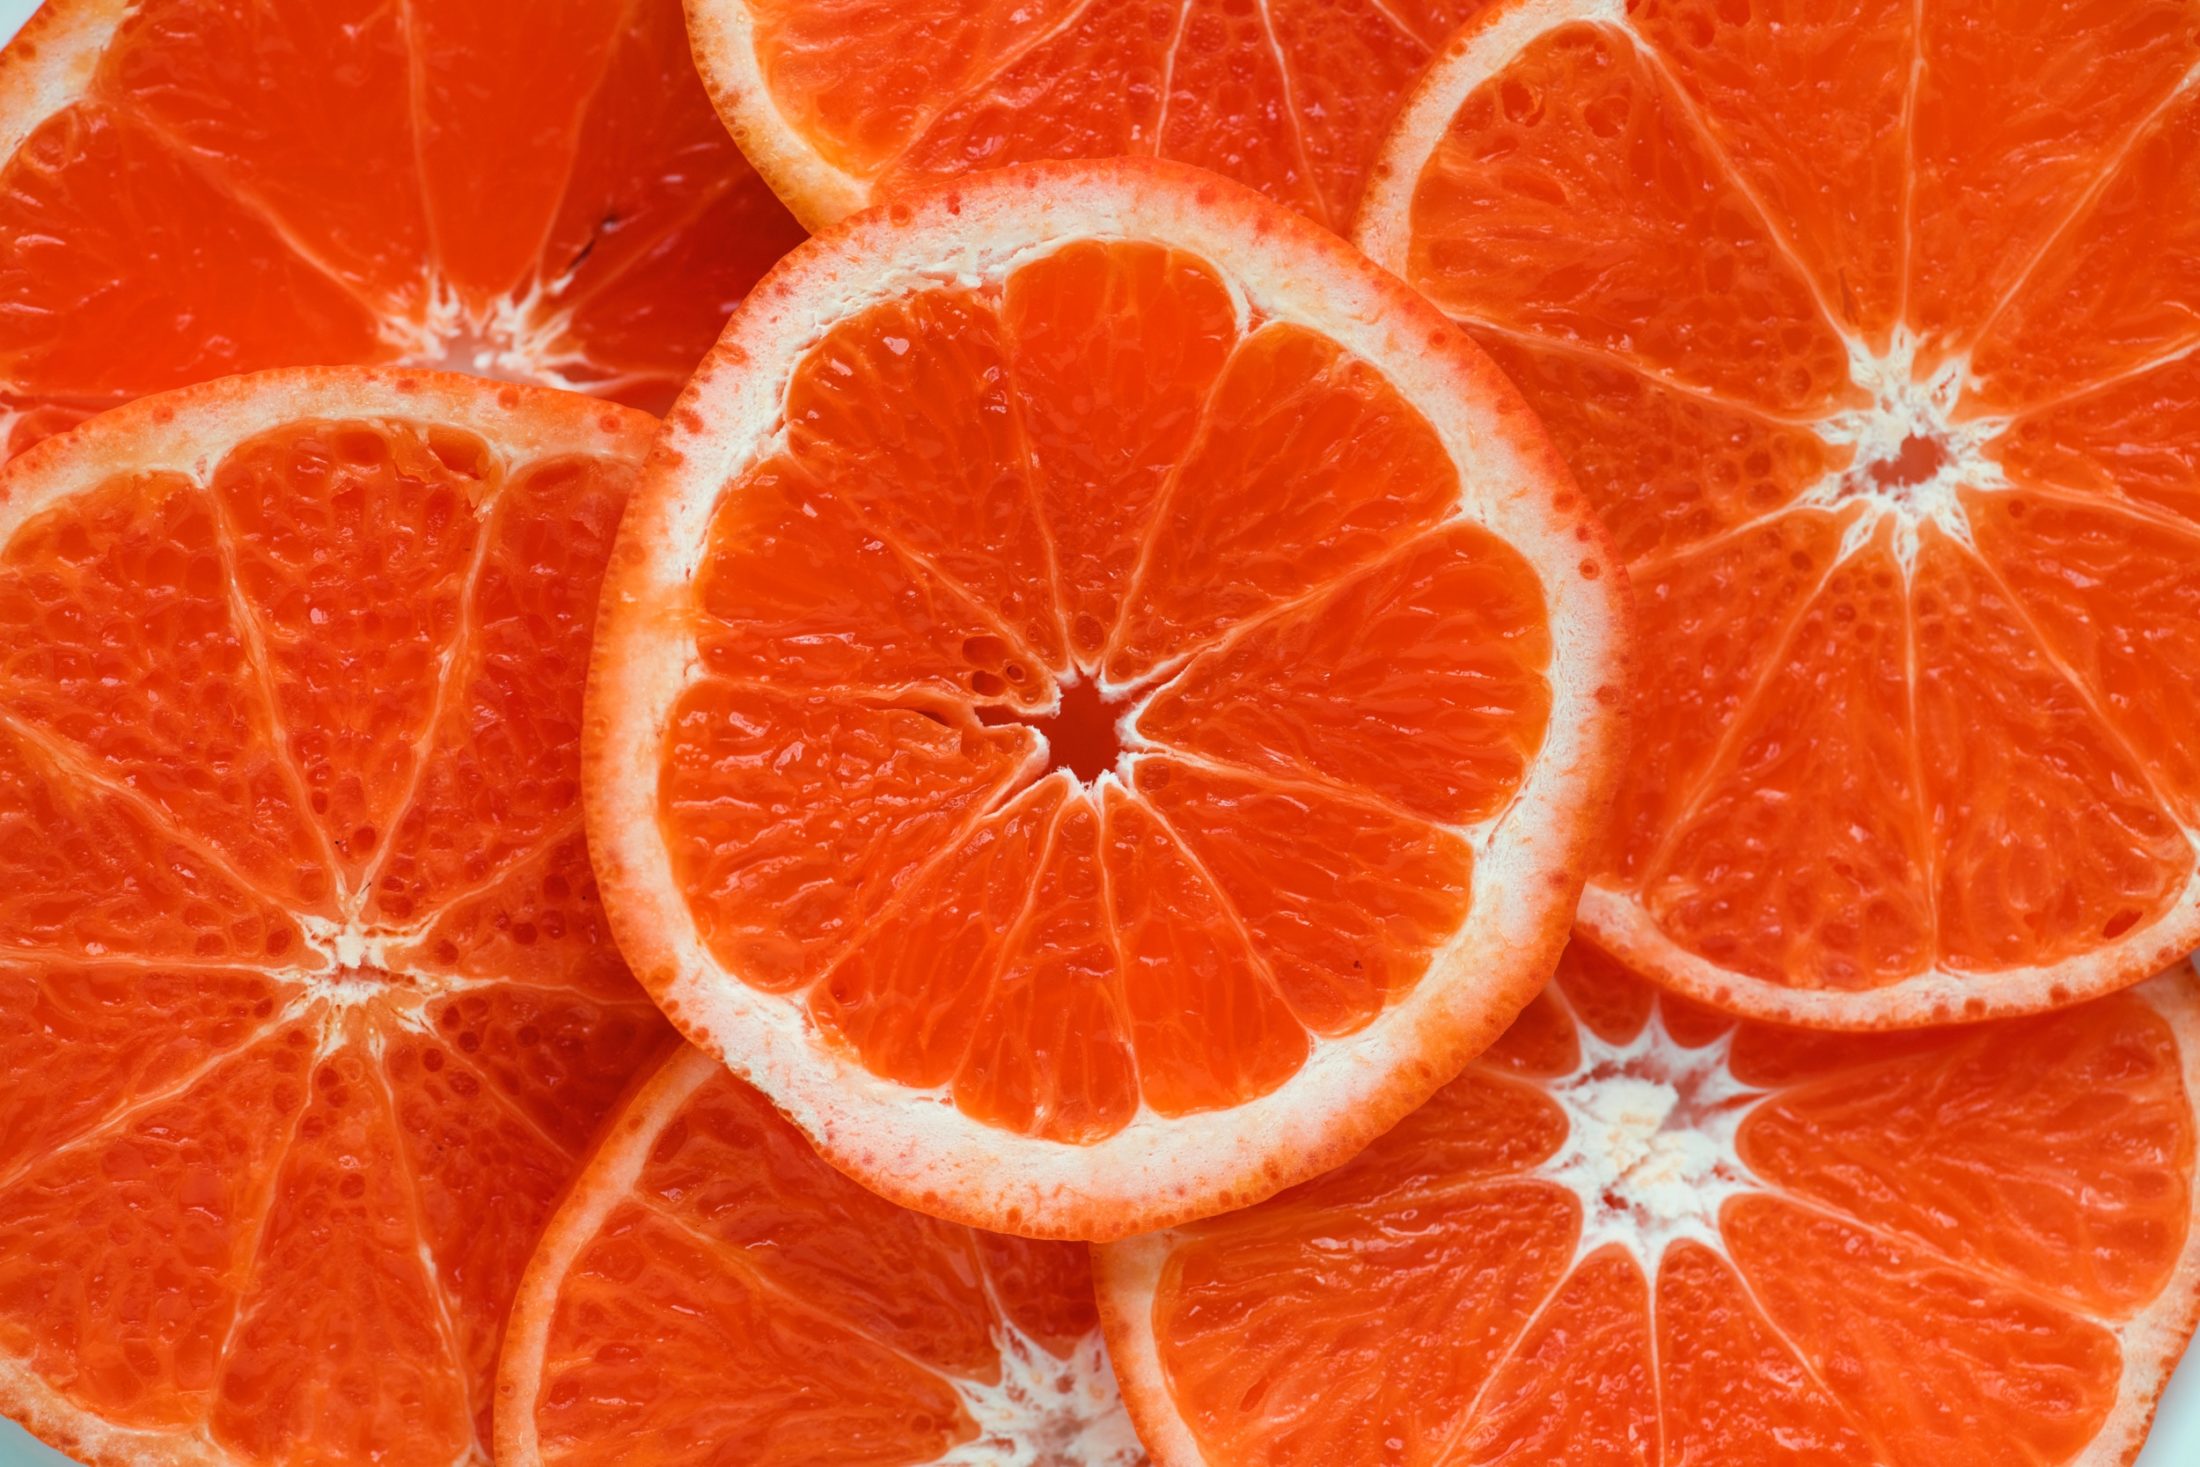 sliced grapefruits are healthy fruits